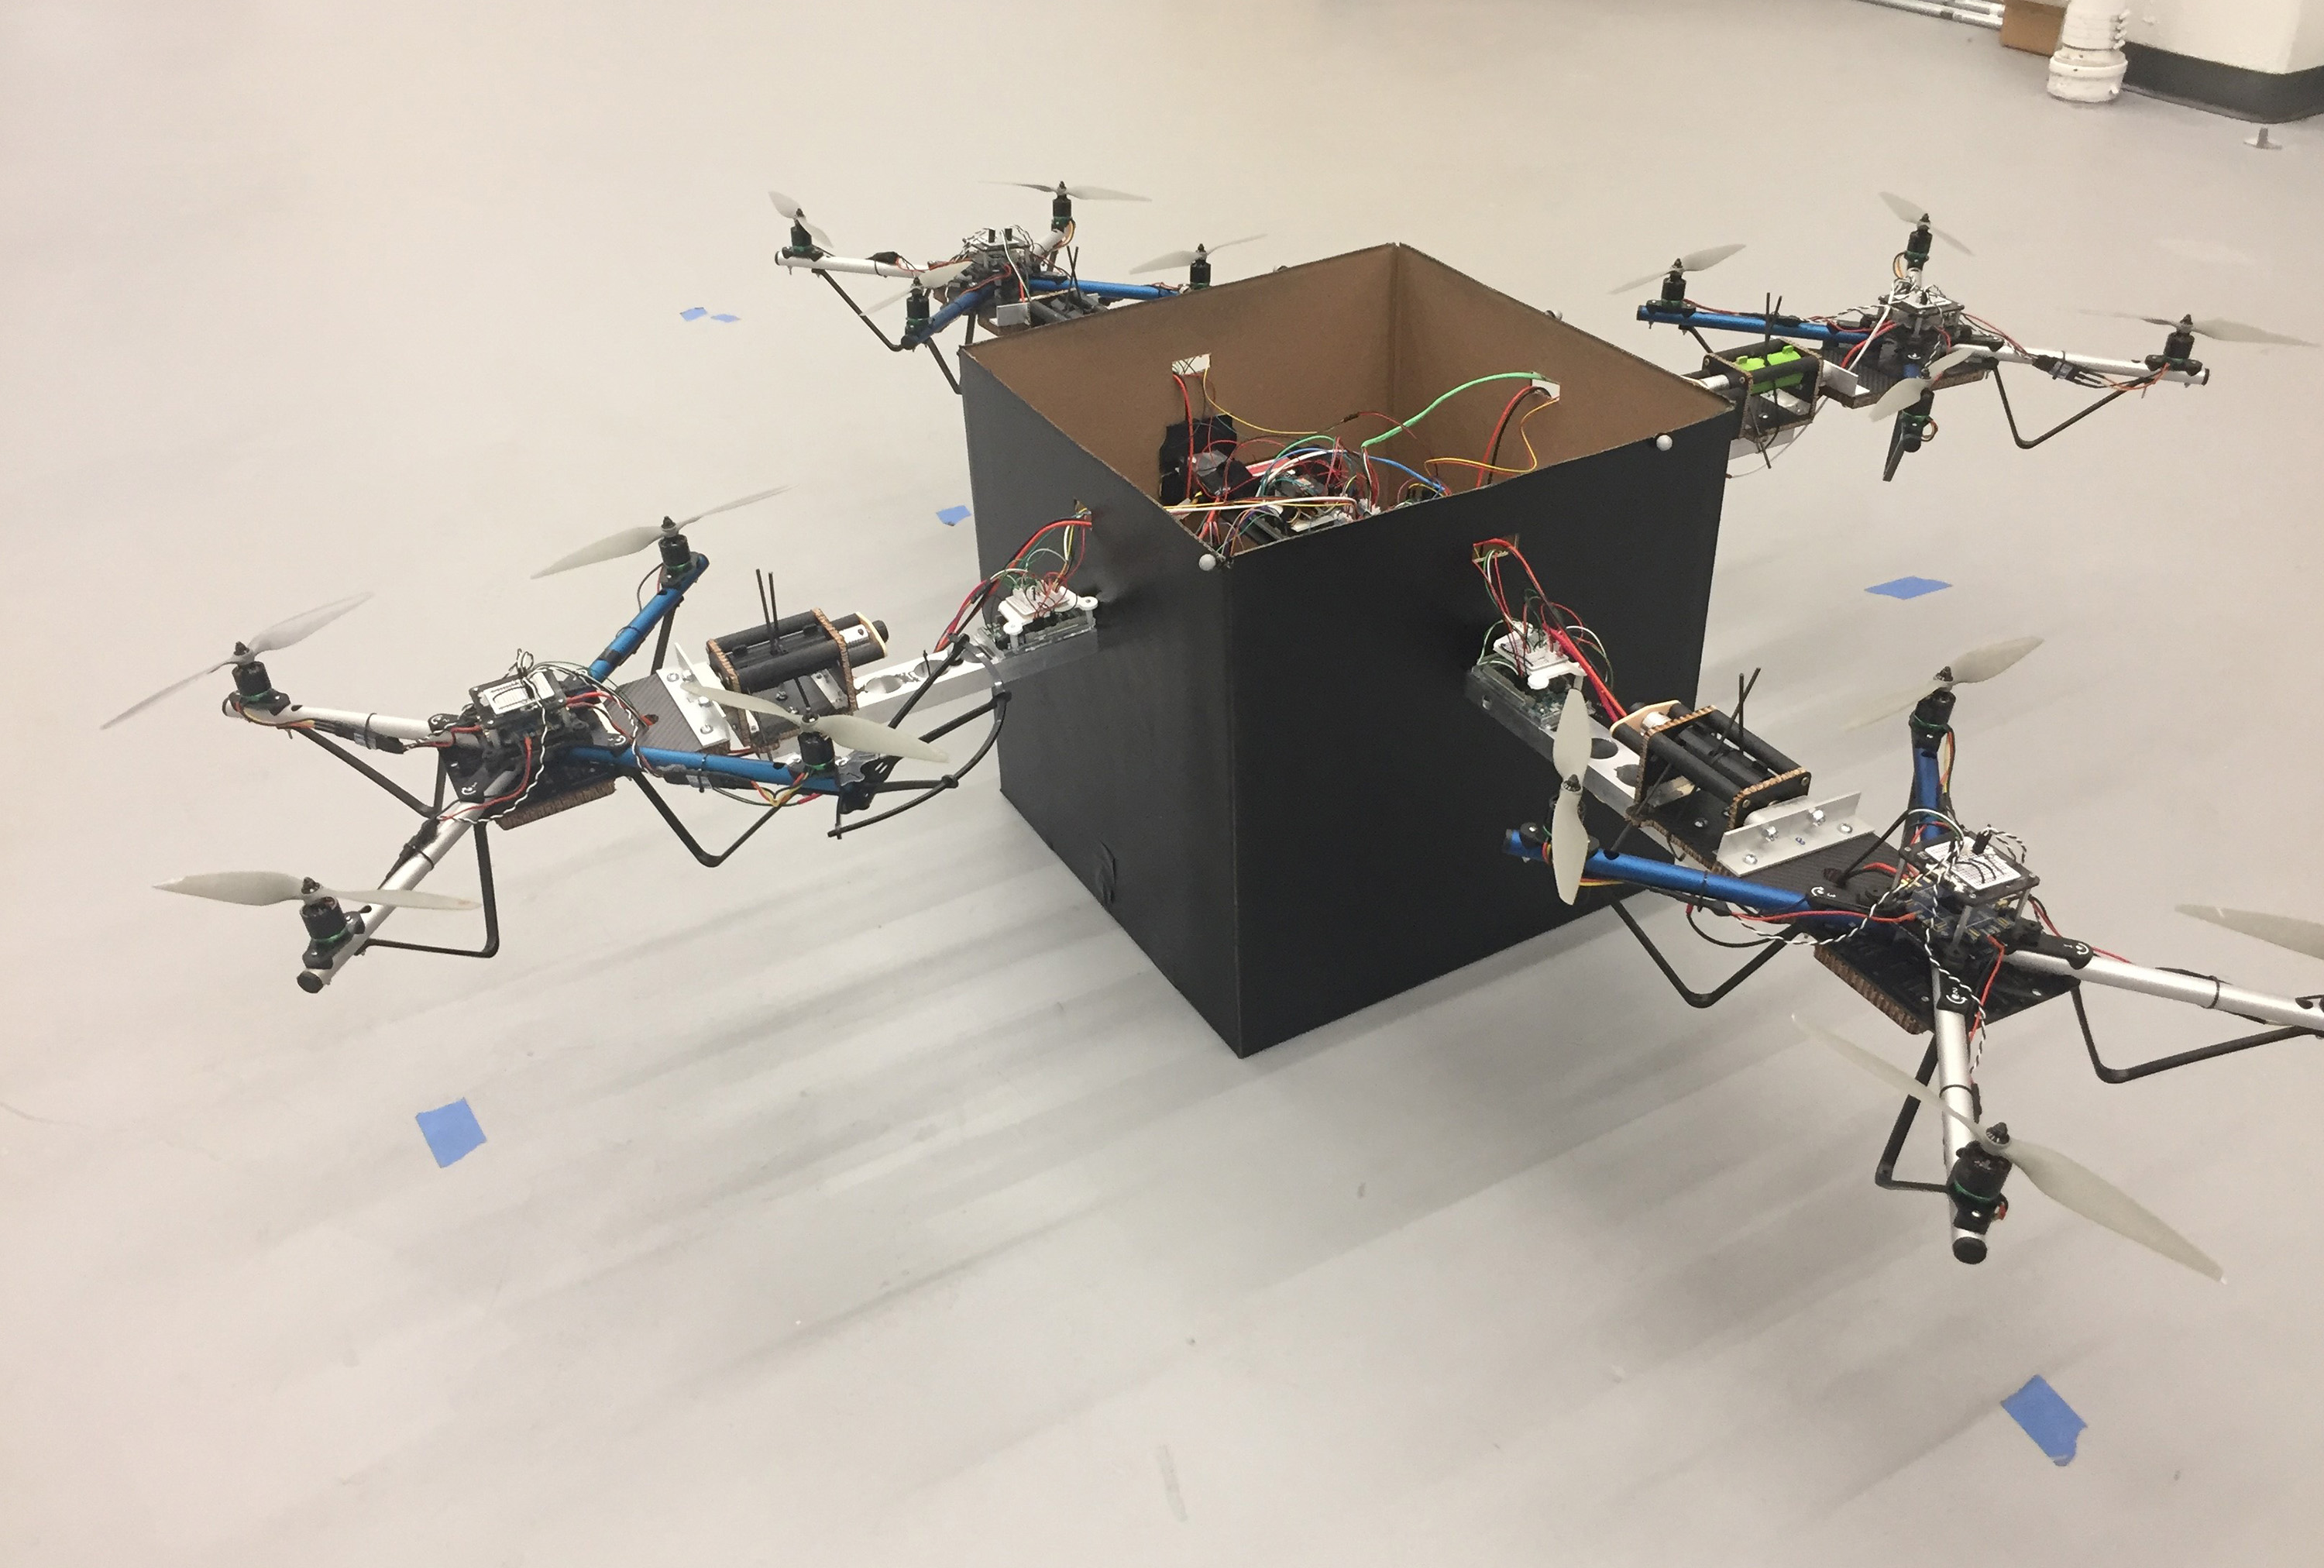 Researchers have developed a modular solution for handling larger packages without the need for a complex fleet of drones of varying sizes. By allowing teams of small drones to collaboratively lift objects using an adaptive control algorithm, the strategy could allow a wide range of packages to be delivered using a combination of several standard-sized vehicles. (Credit: John Toon, Georgia Tech)